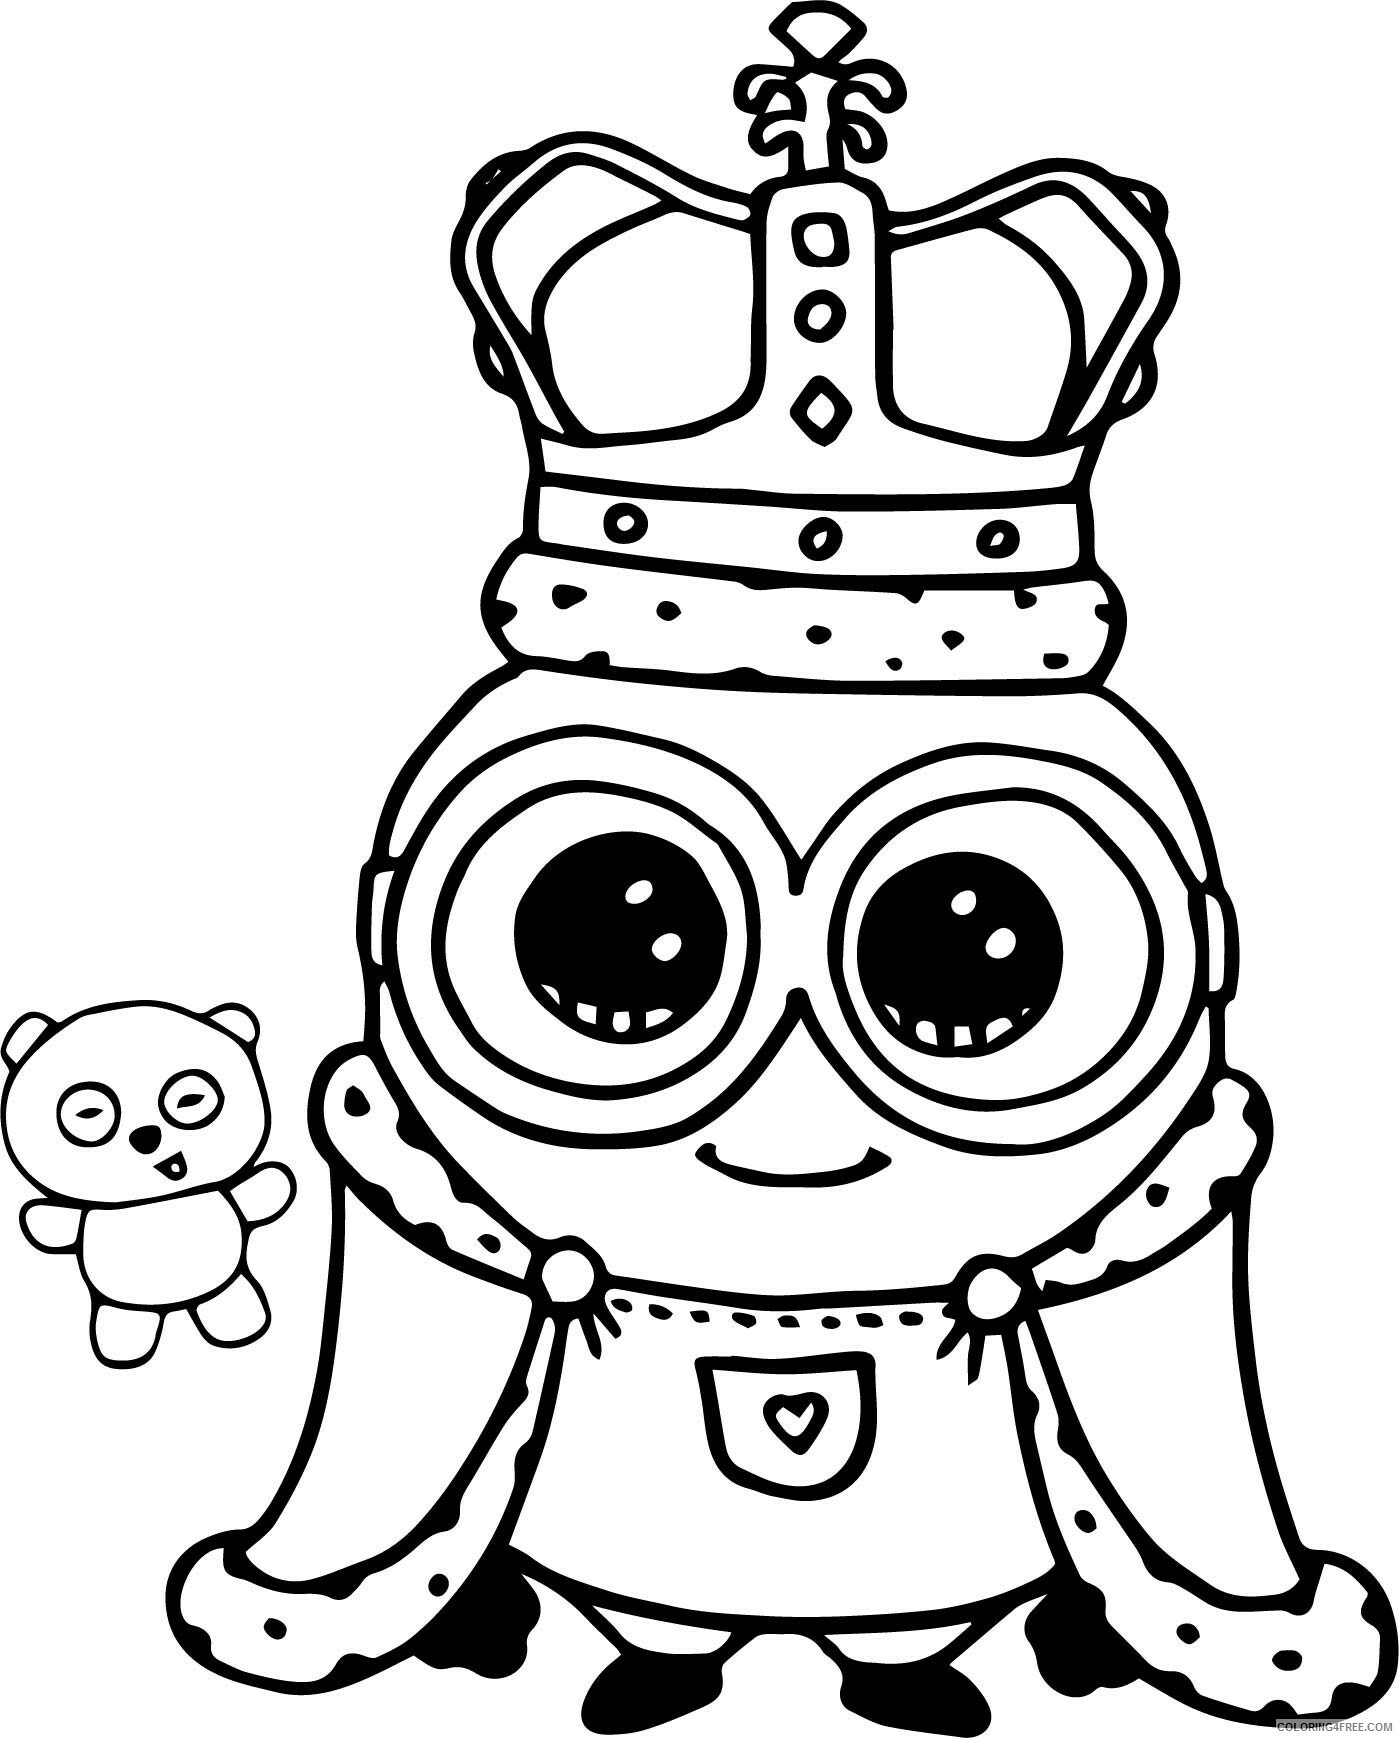 minions-coloring-pages-tv-film-cute-minion-printable-2020-05172